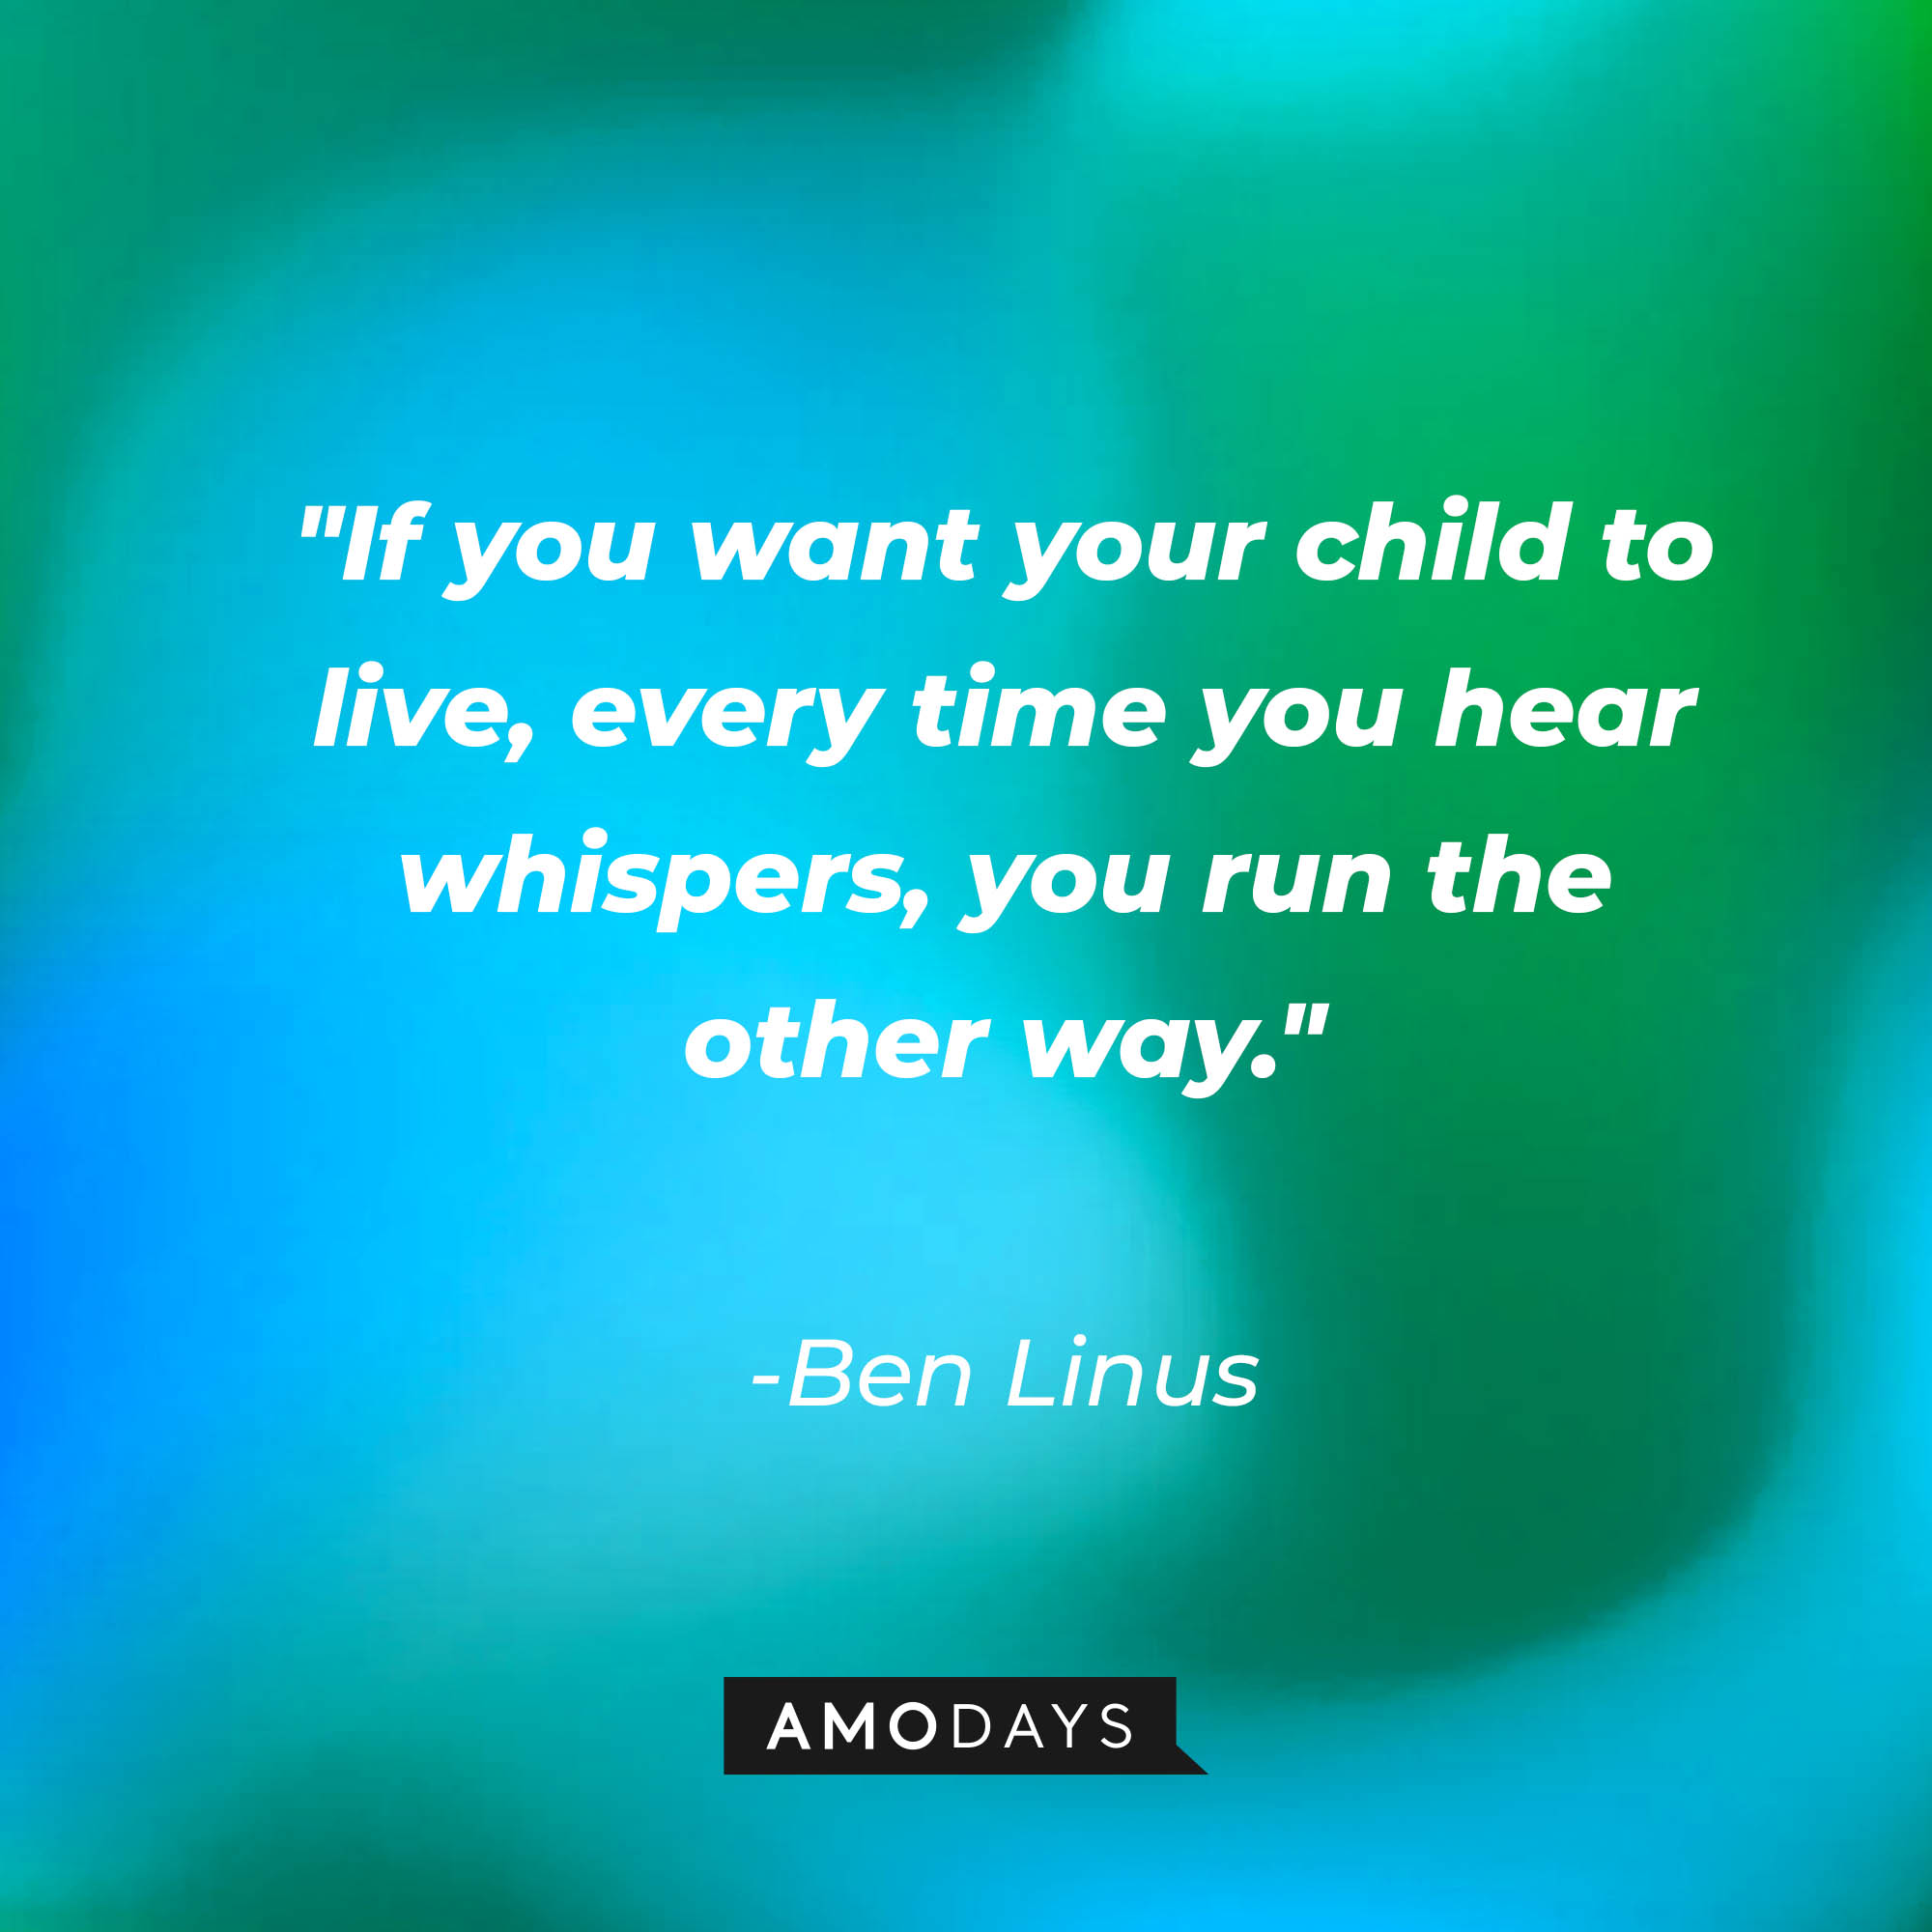 Ben Linus's quote: "If you want your child to live, every time you hear whispers, you run the other way." | Source: AmoDays